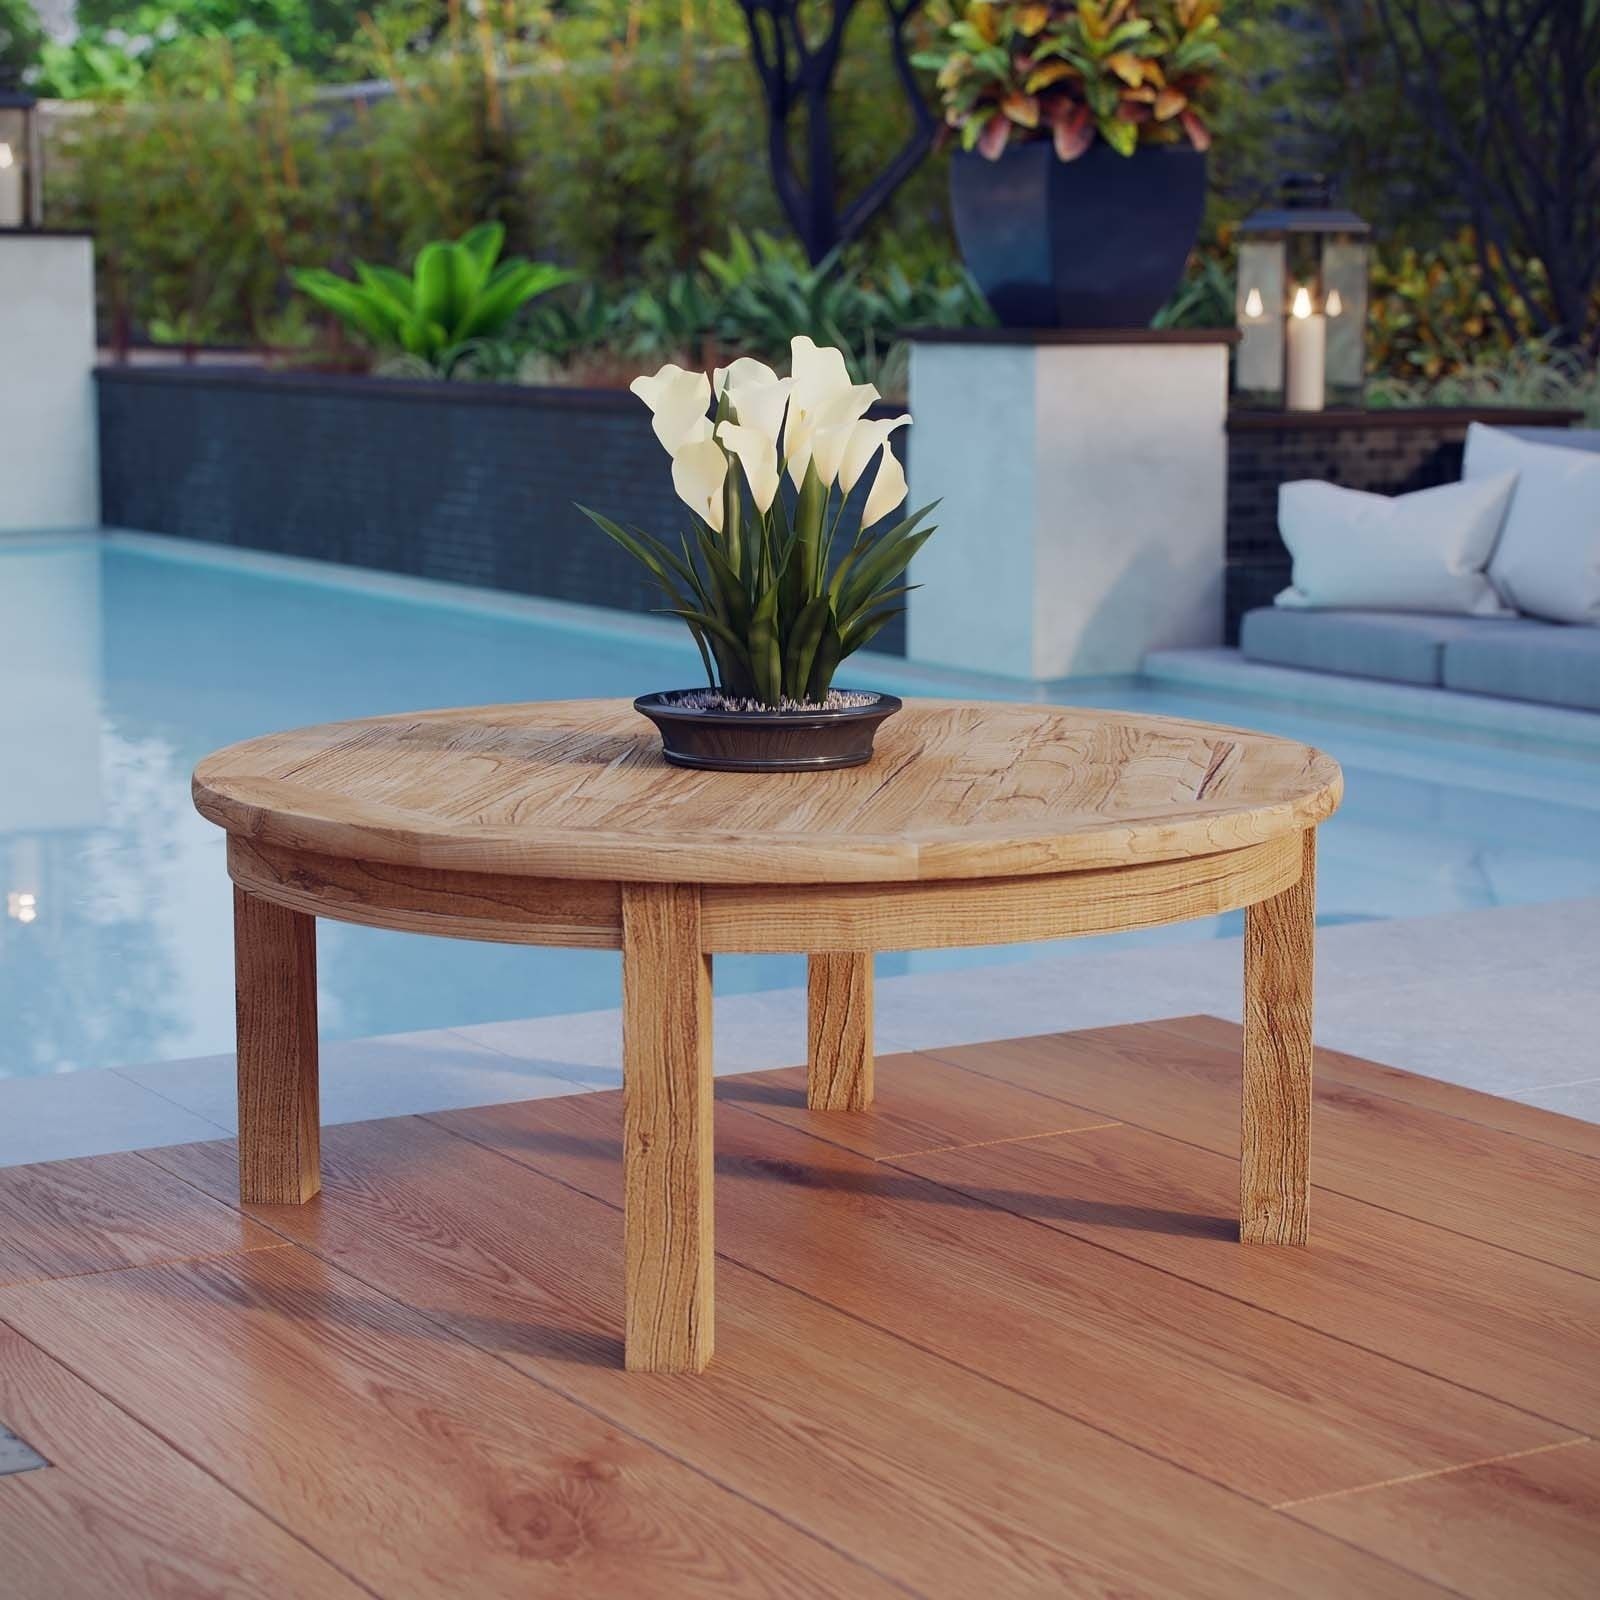 Shop Modway Pier Natural Teak Modern Outdoor Round Patio Coffee Table Inside Modern Outdoor Patio Coffee Tables (Gallery 4 of 20)